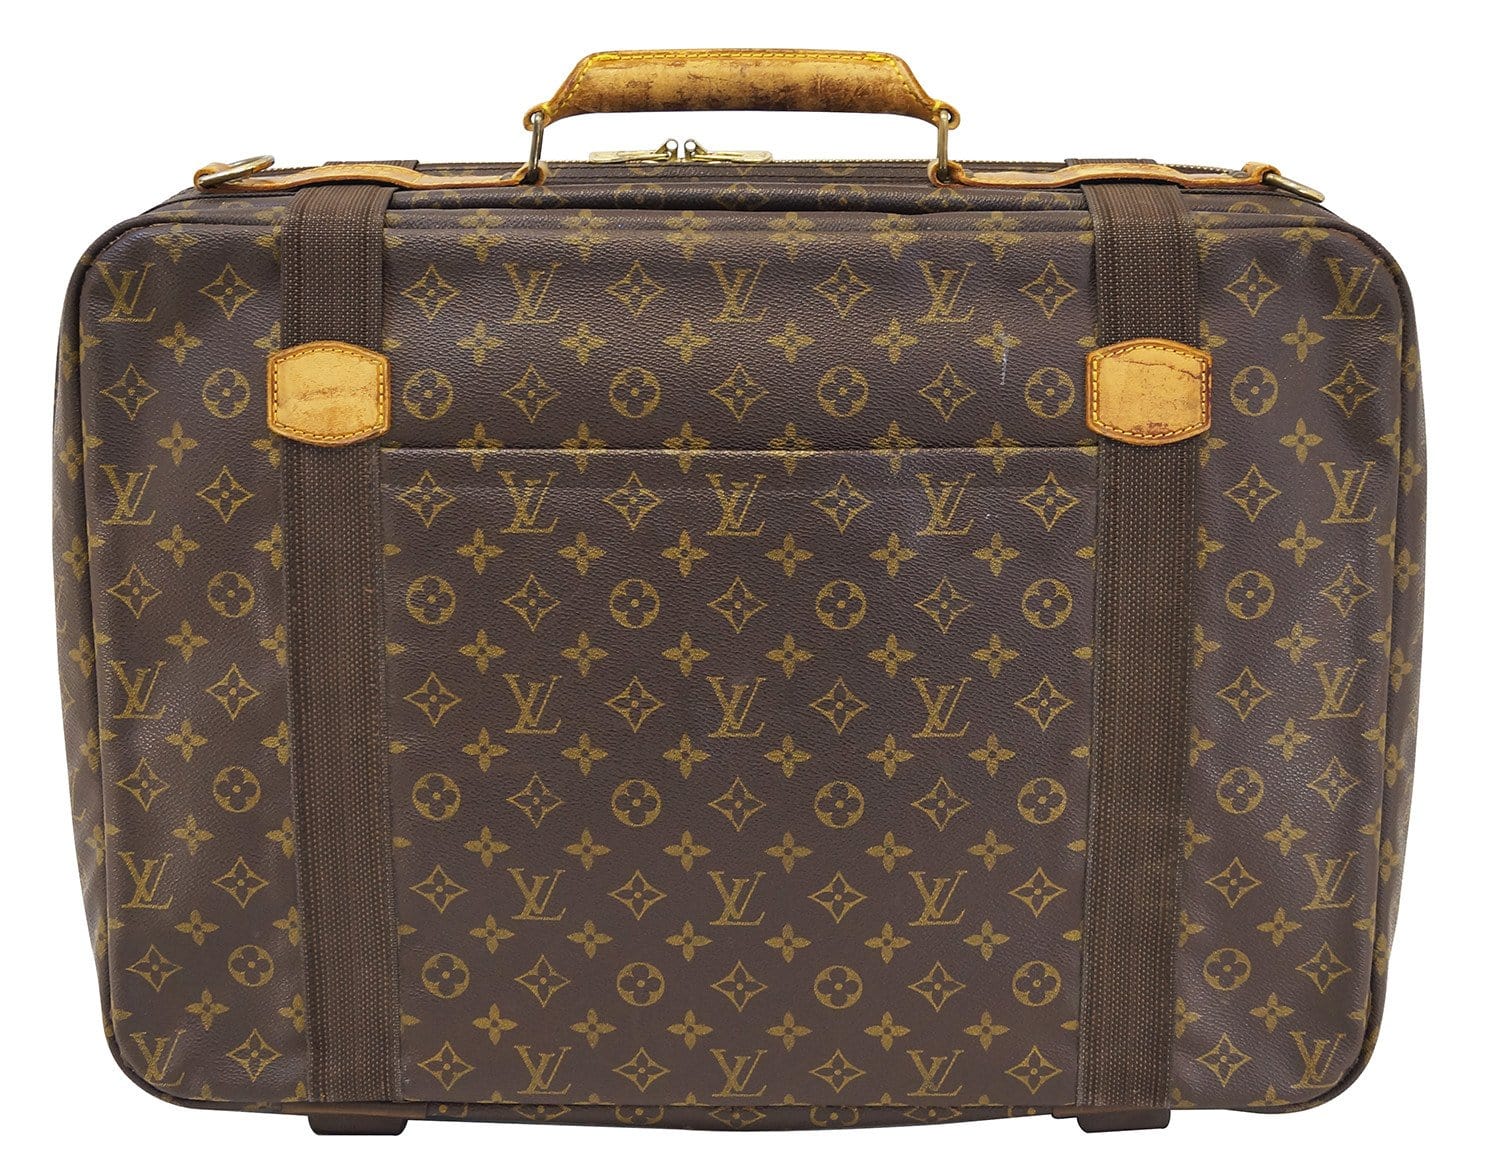 Louis VUITTON SATELLITE suitcase in natural leather and…